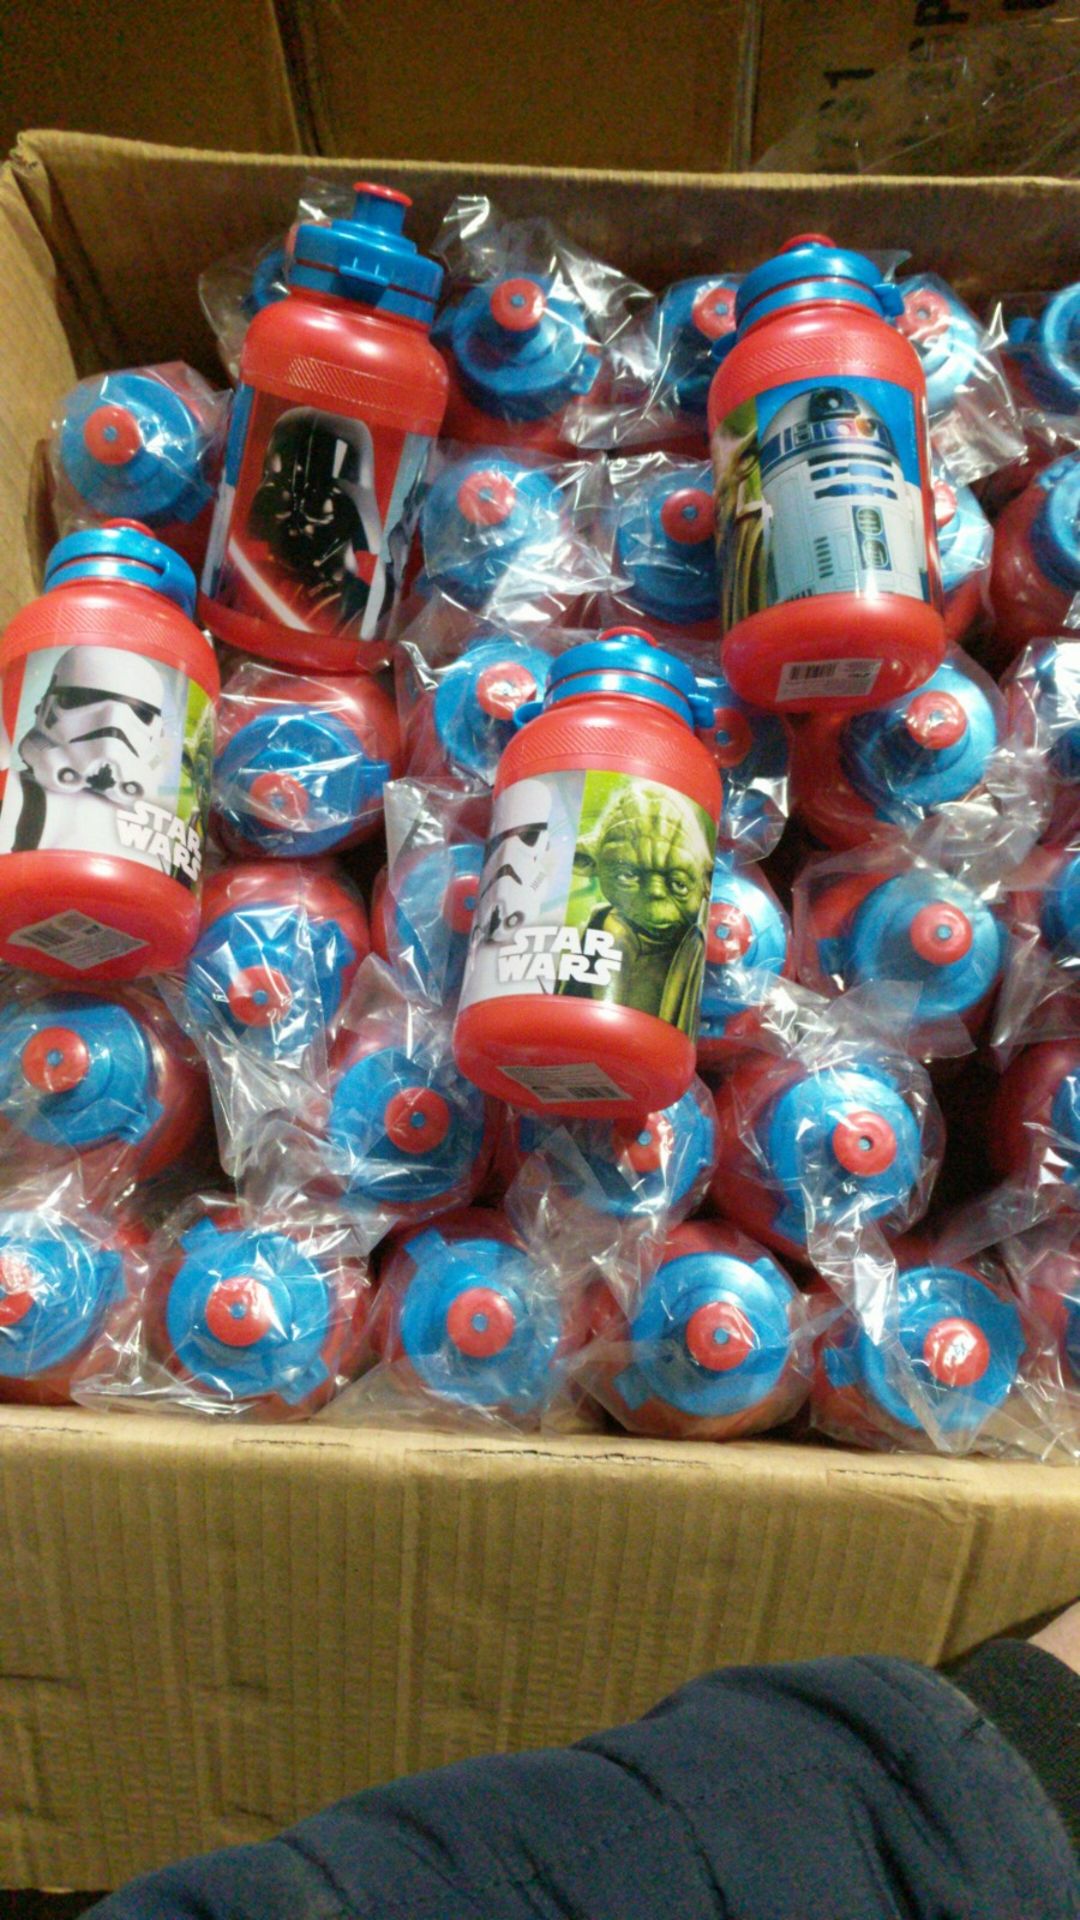 50pcs Brand new Star Wars Drinking Sports Bottle designs as pictured - 50pcs in lot